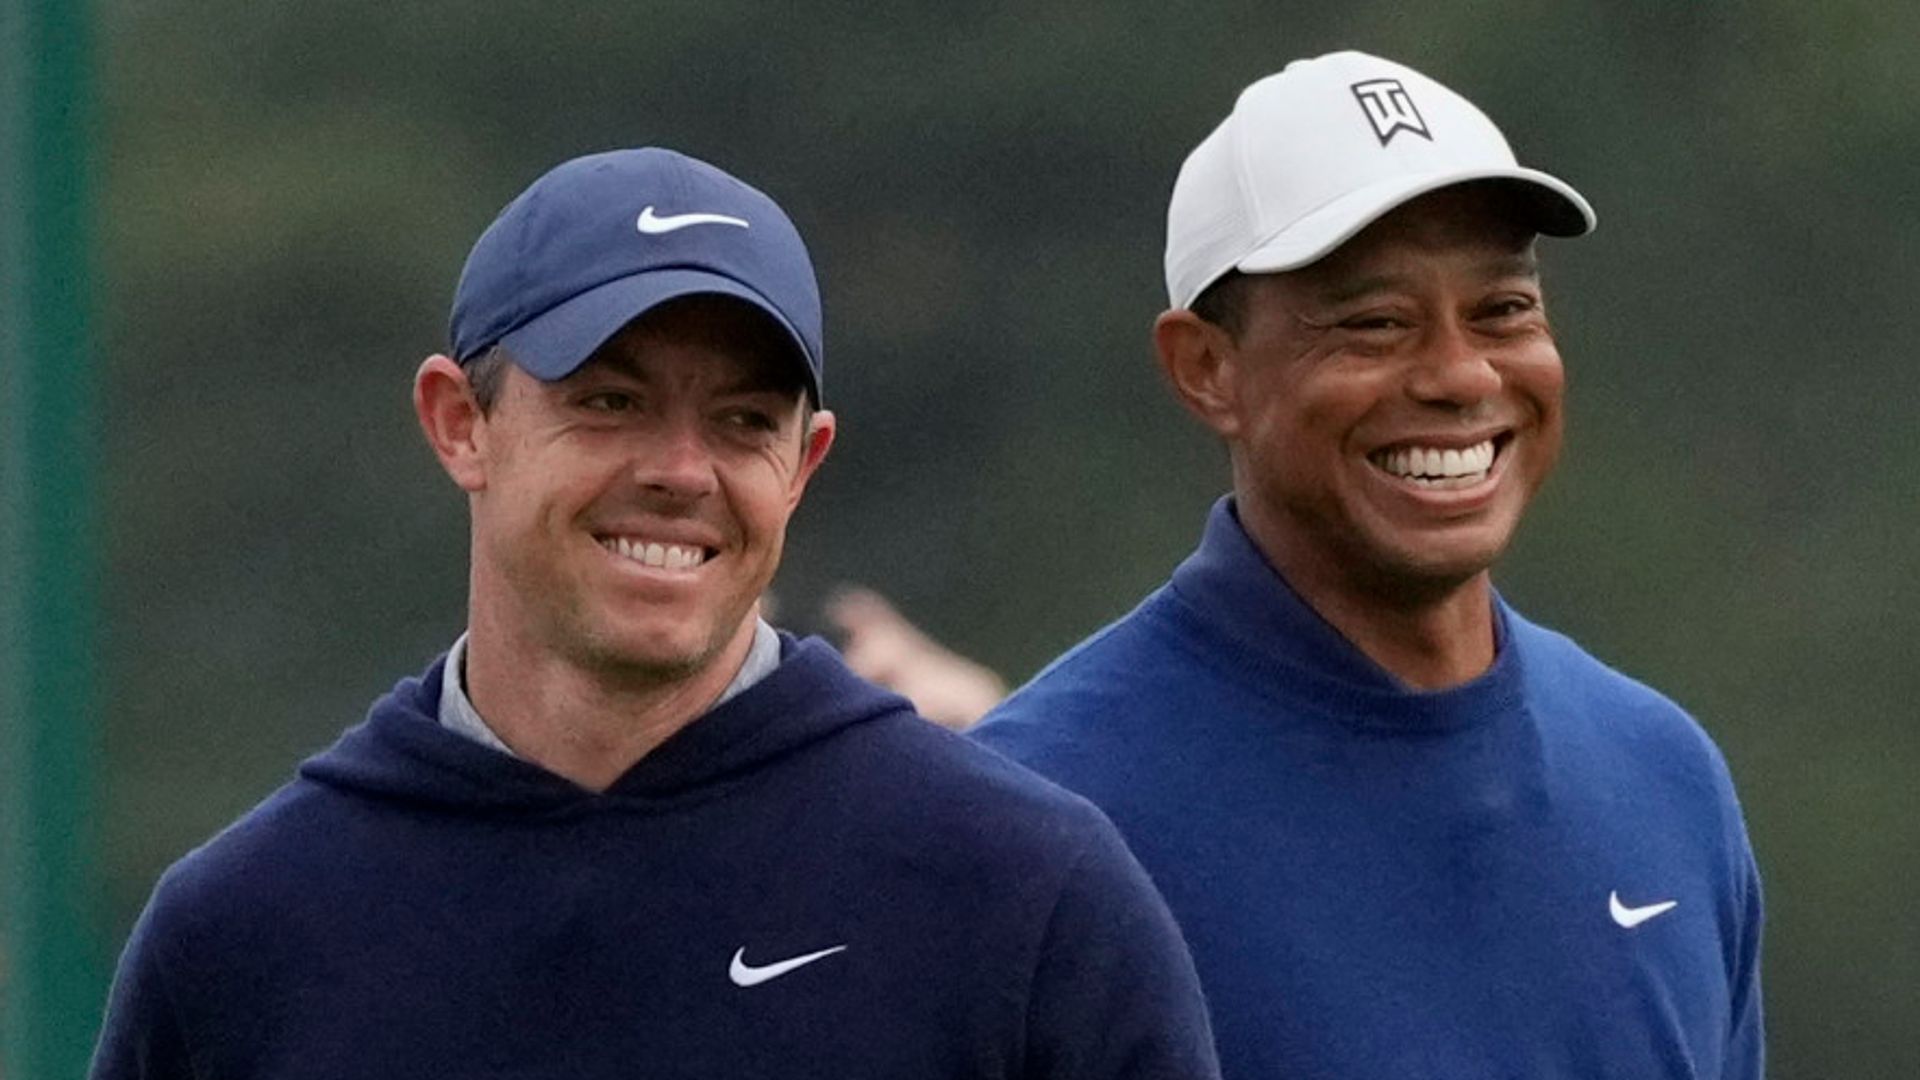 Woods and McIlroy's high-tech golf league to launch in January